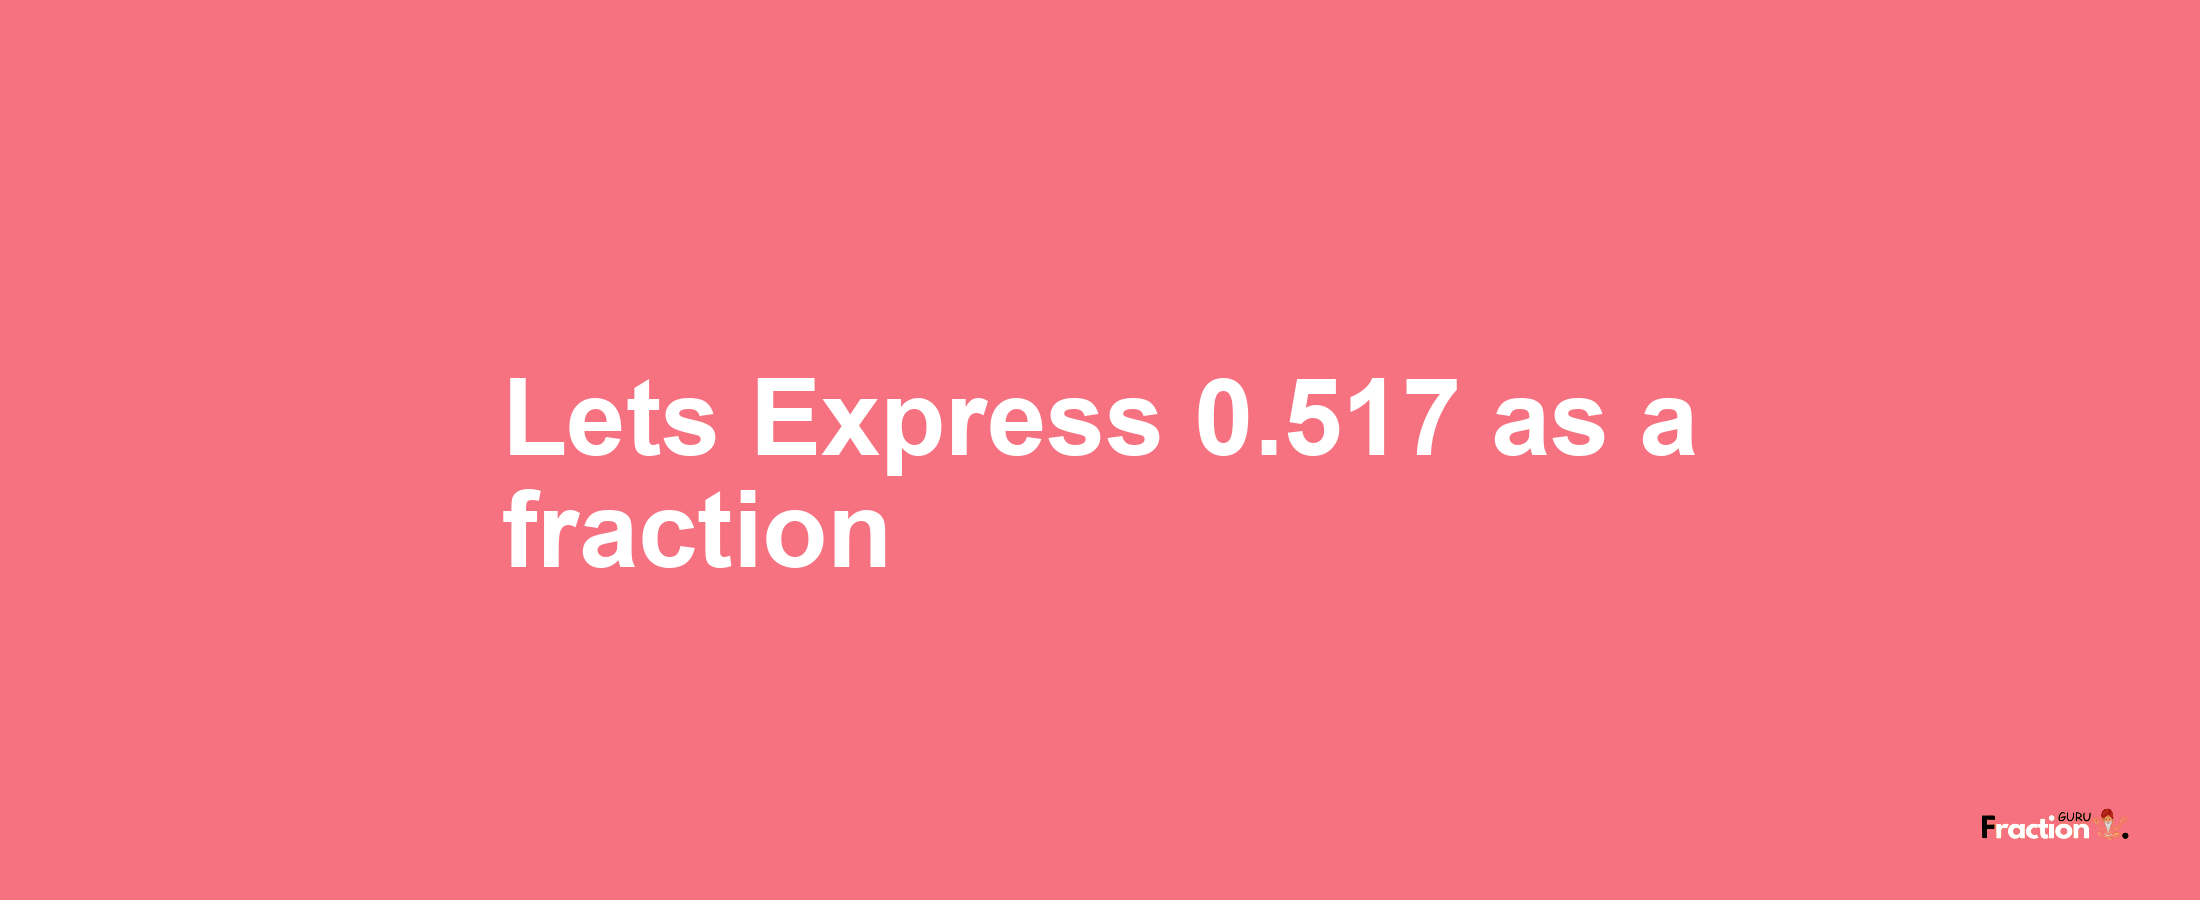 Lets Express 0.517 as afraction